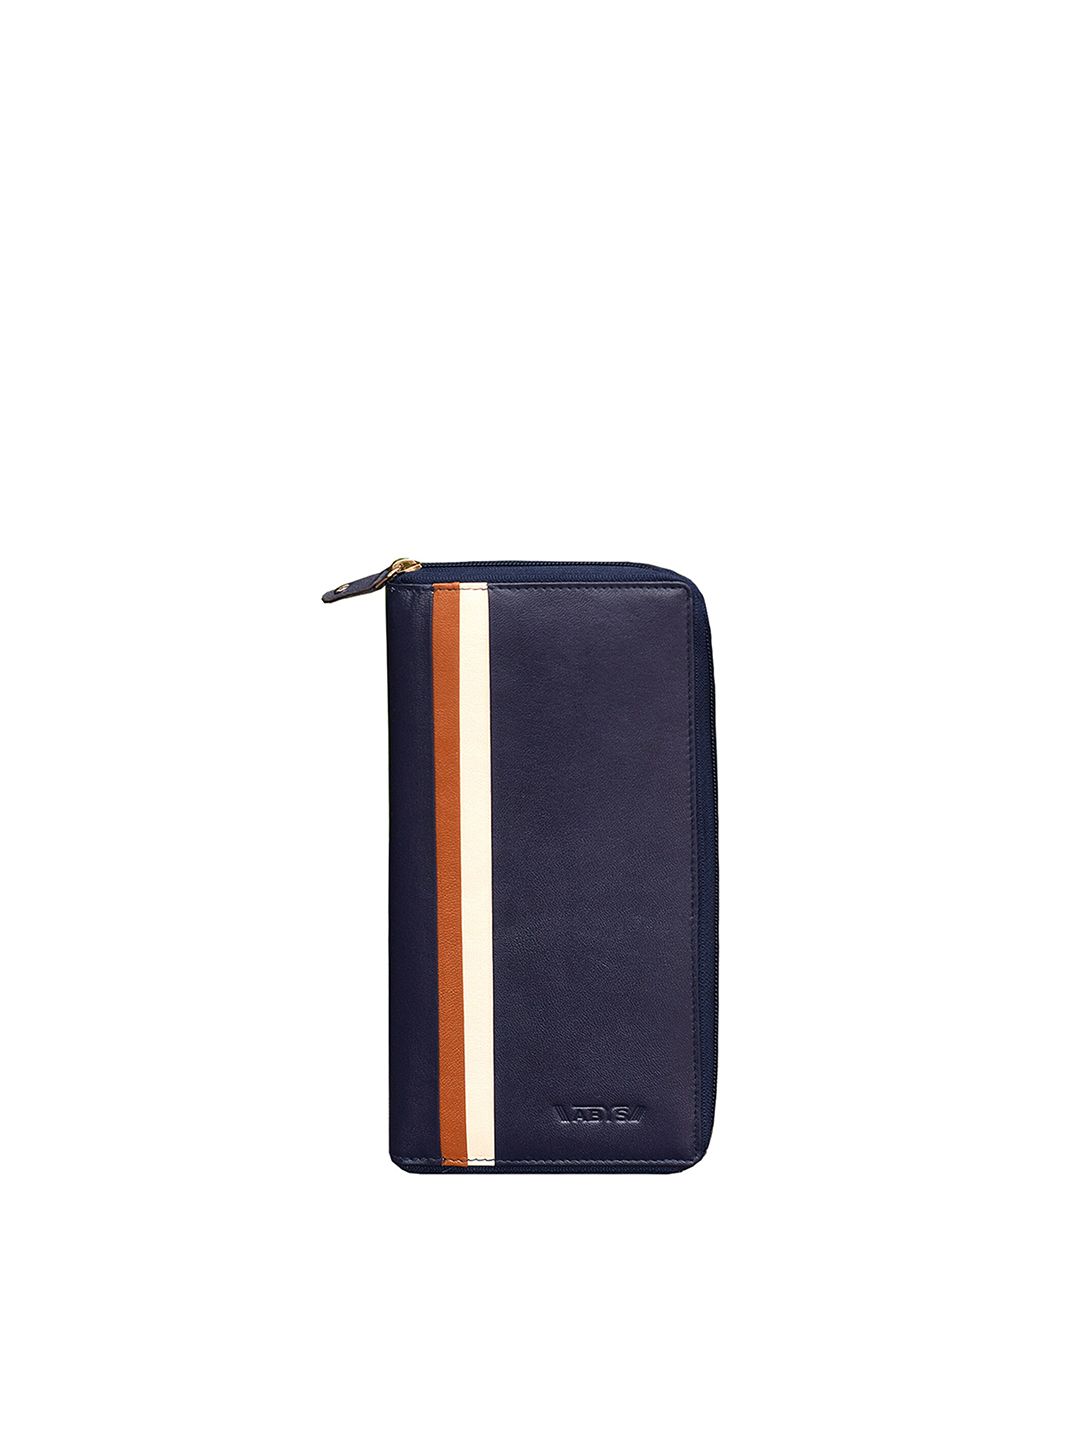 ABYS Unisex Navy Blue & White Striped Genuine Leather Passport Holder Price in India